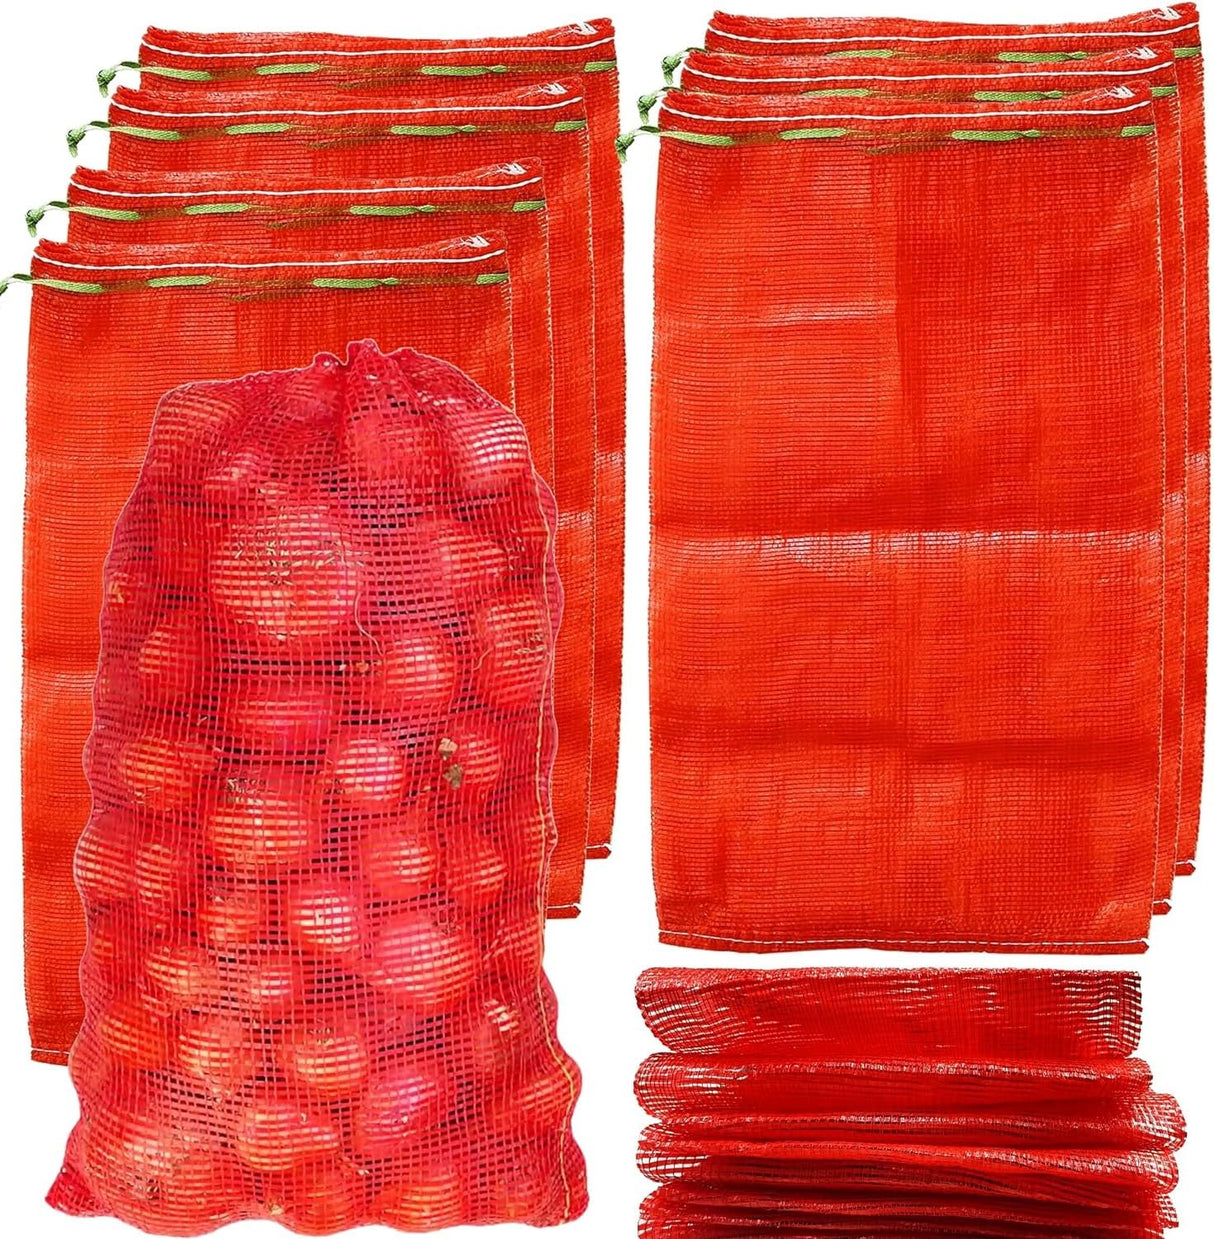 SINGHAL Leno Mesh Storage Produce Bags Reusable for Vegetable Storage Bags Onion Storage Washable Net Bags (20x28 Inch - Peach, 10)